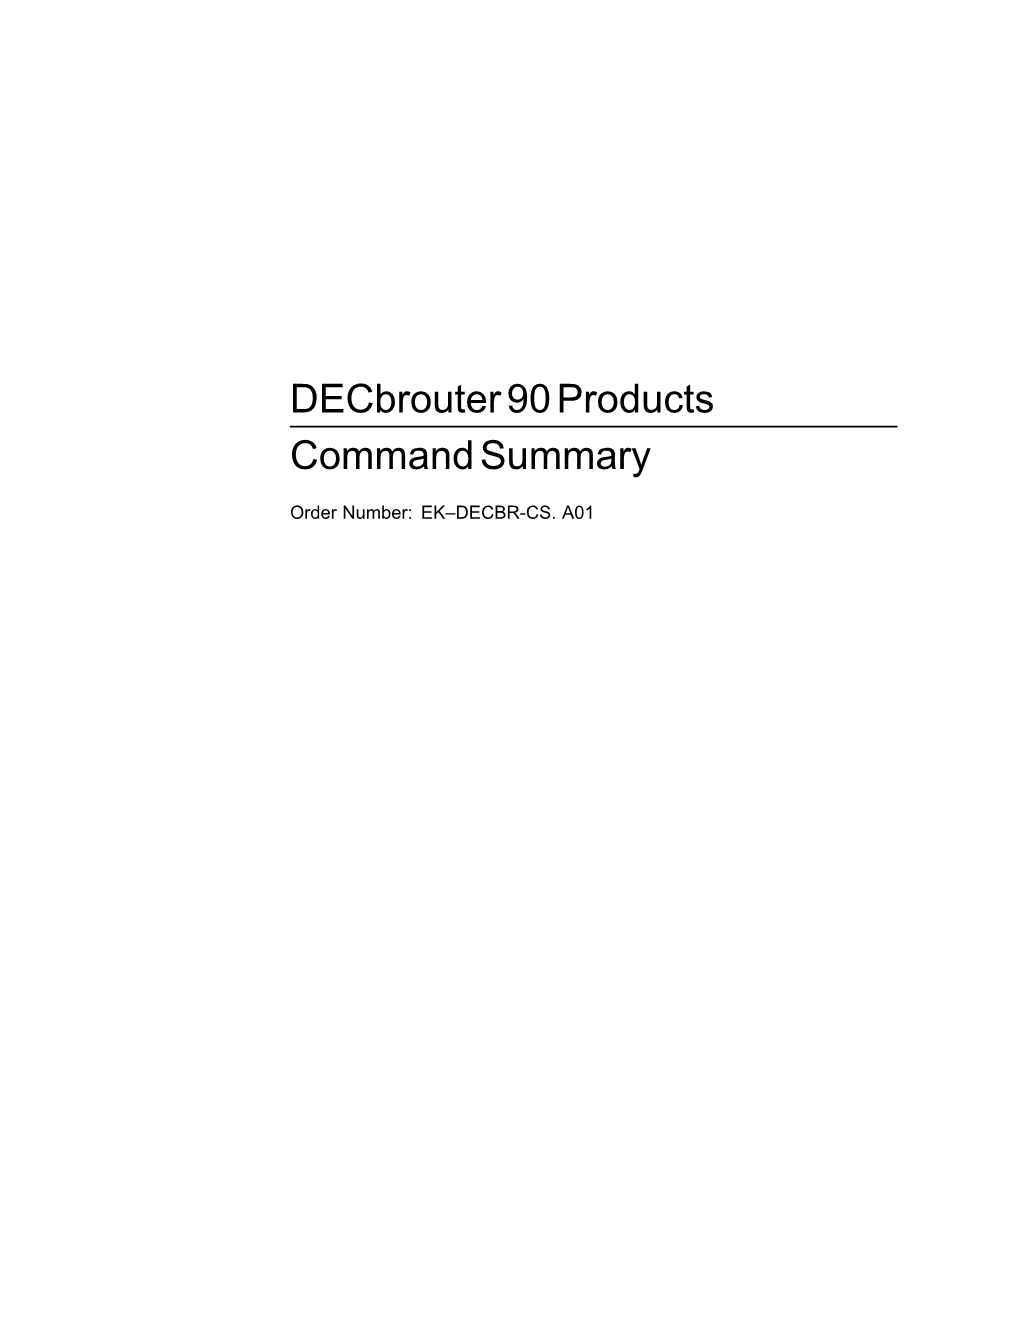 Decbrouter 90 Products Command Summary